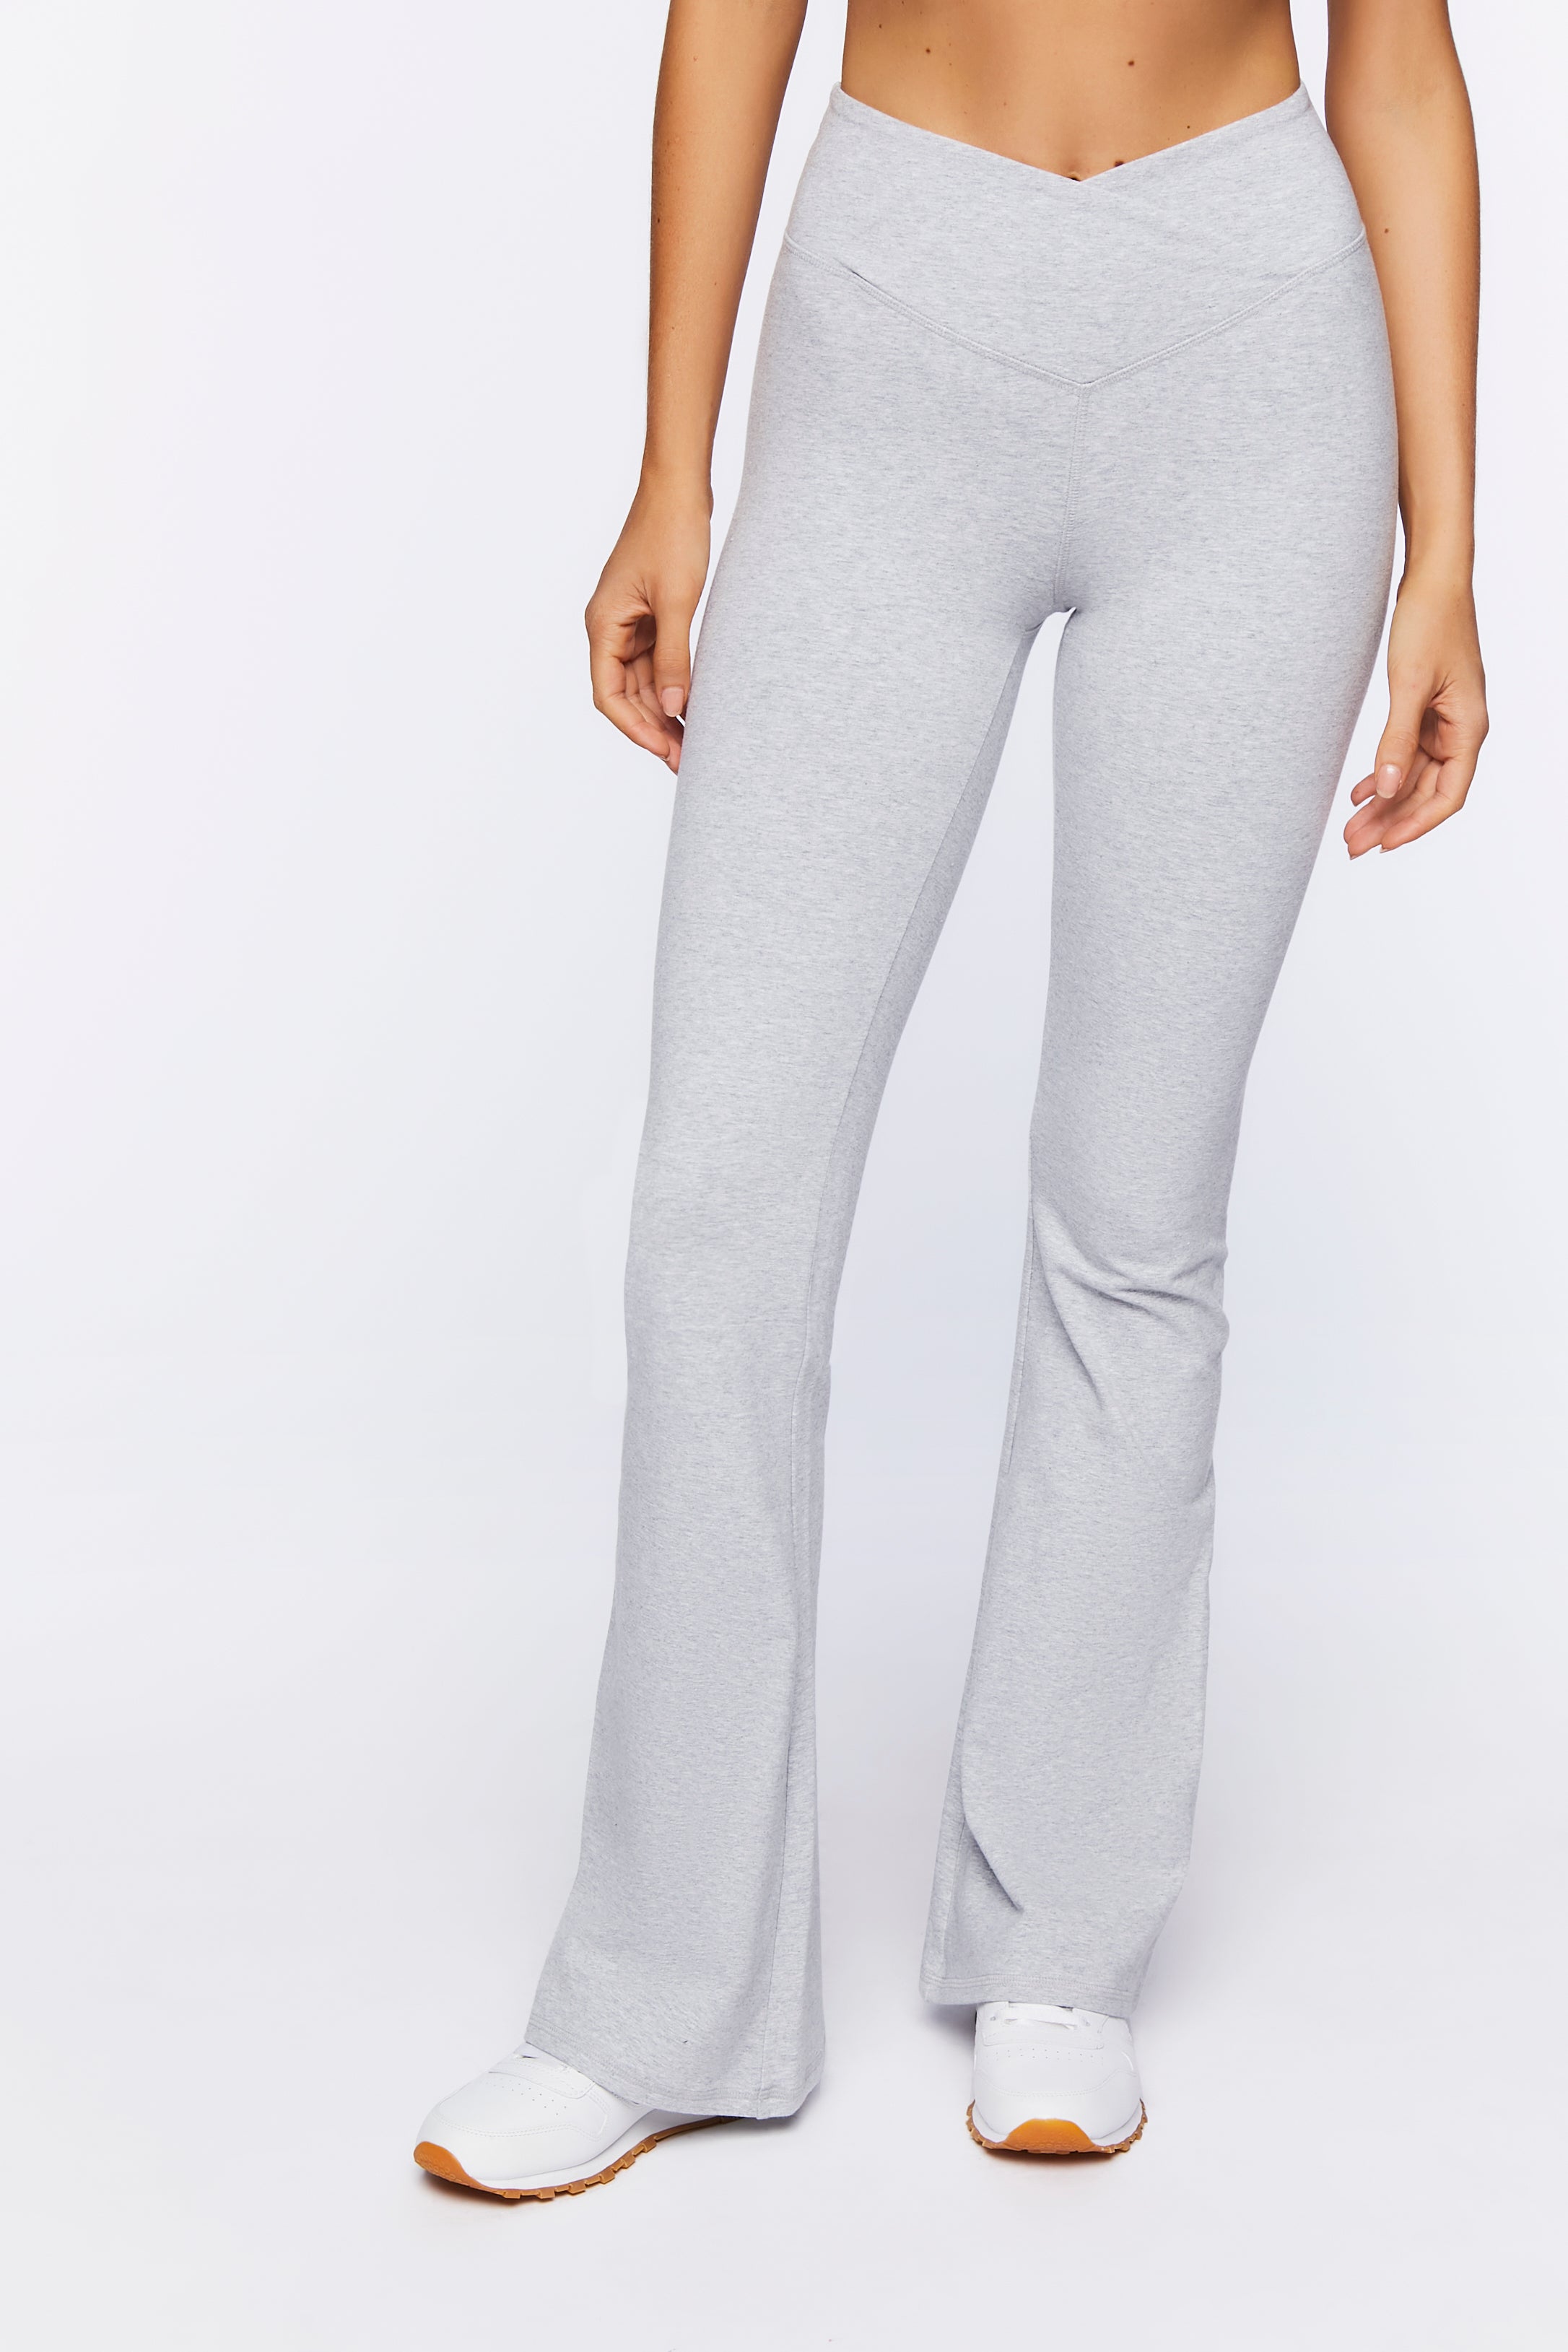 Shop For Active Heathered Flare Leggings